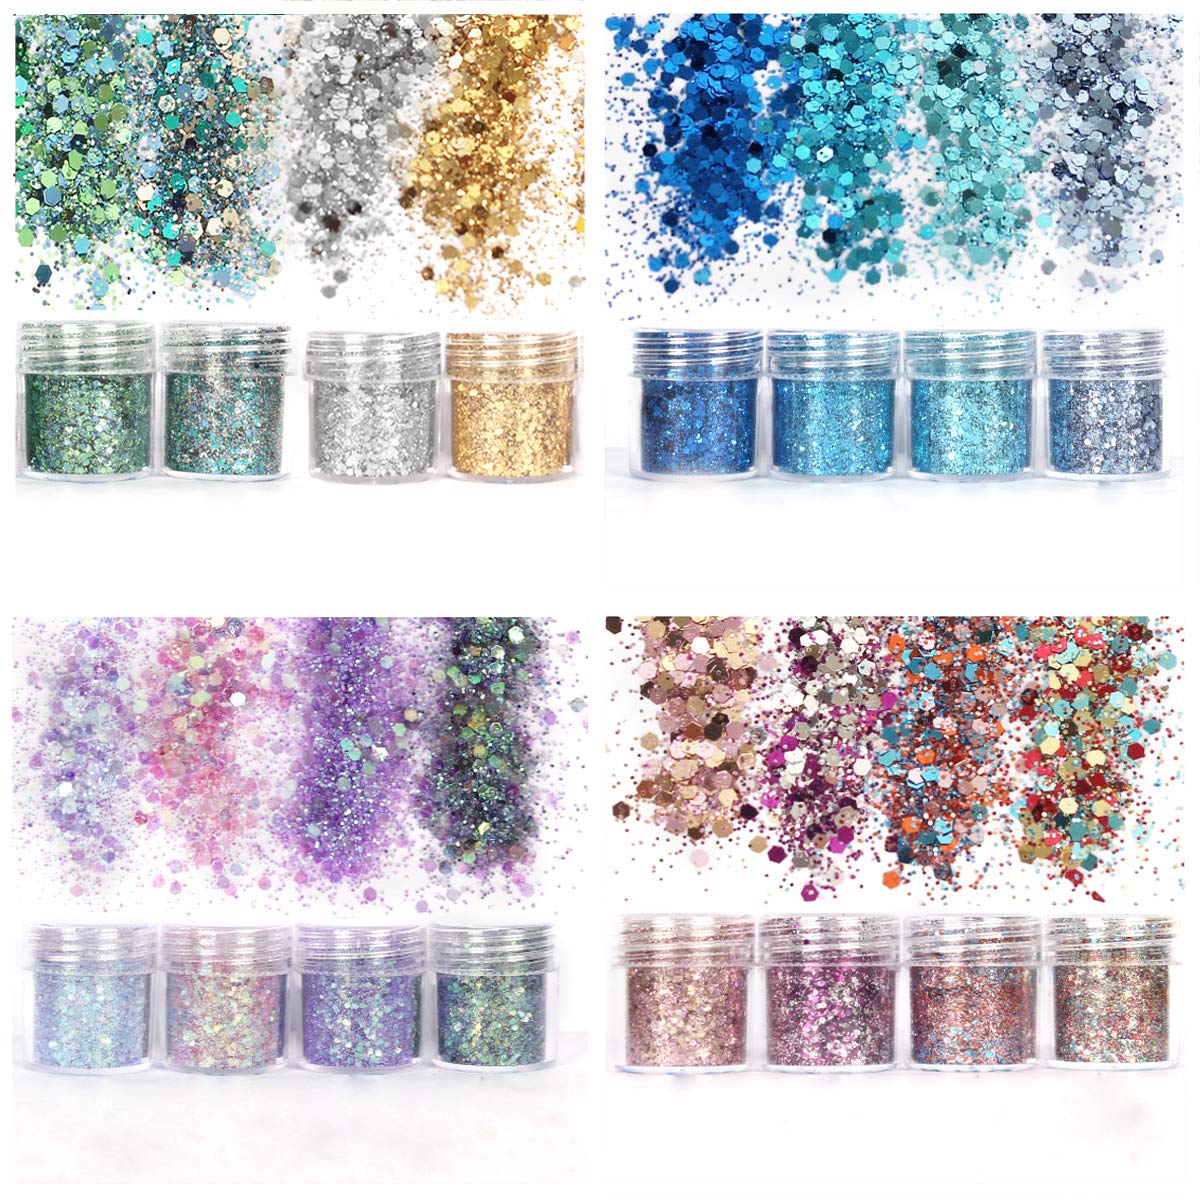 Unime Body Glitter 16 Colors Chunky Glitter for Body Face Hair Make Up Nail Art Mixed Color Glitter